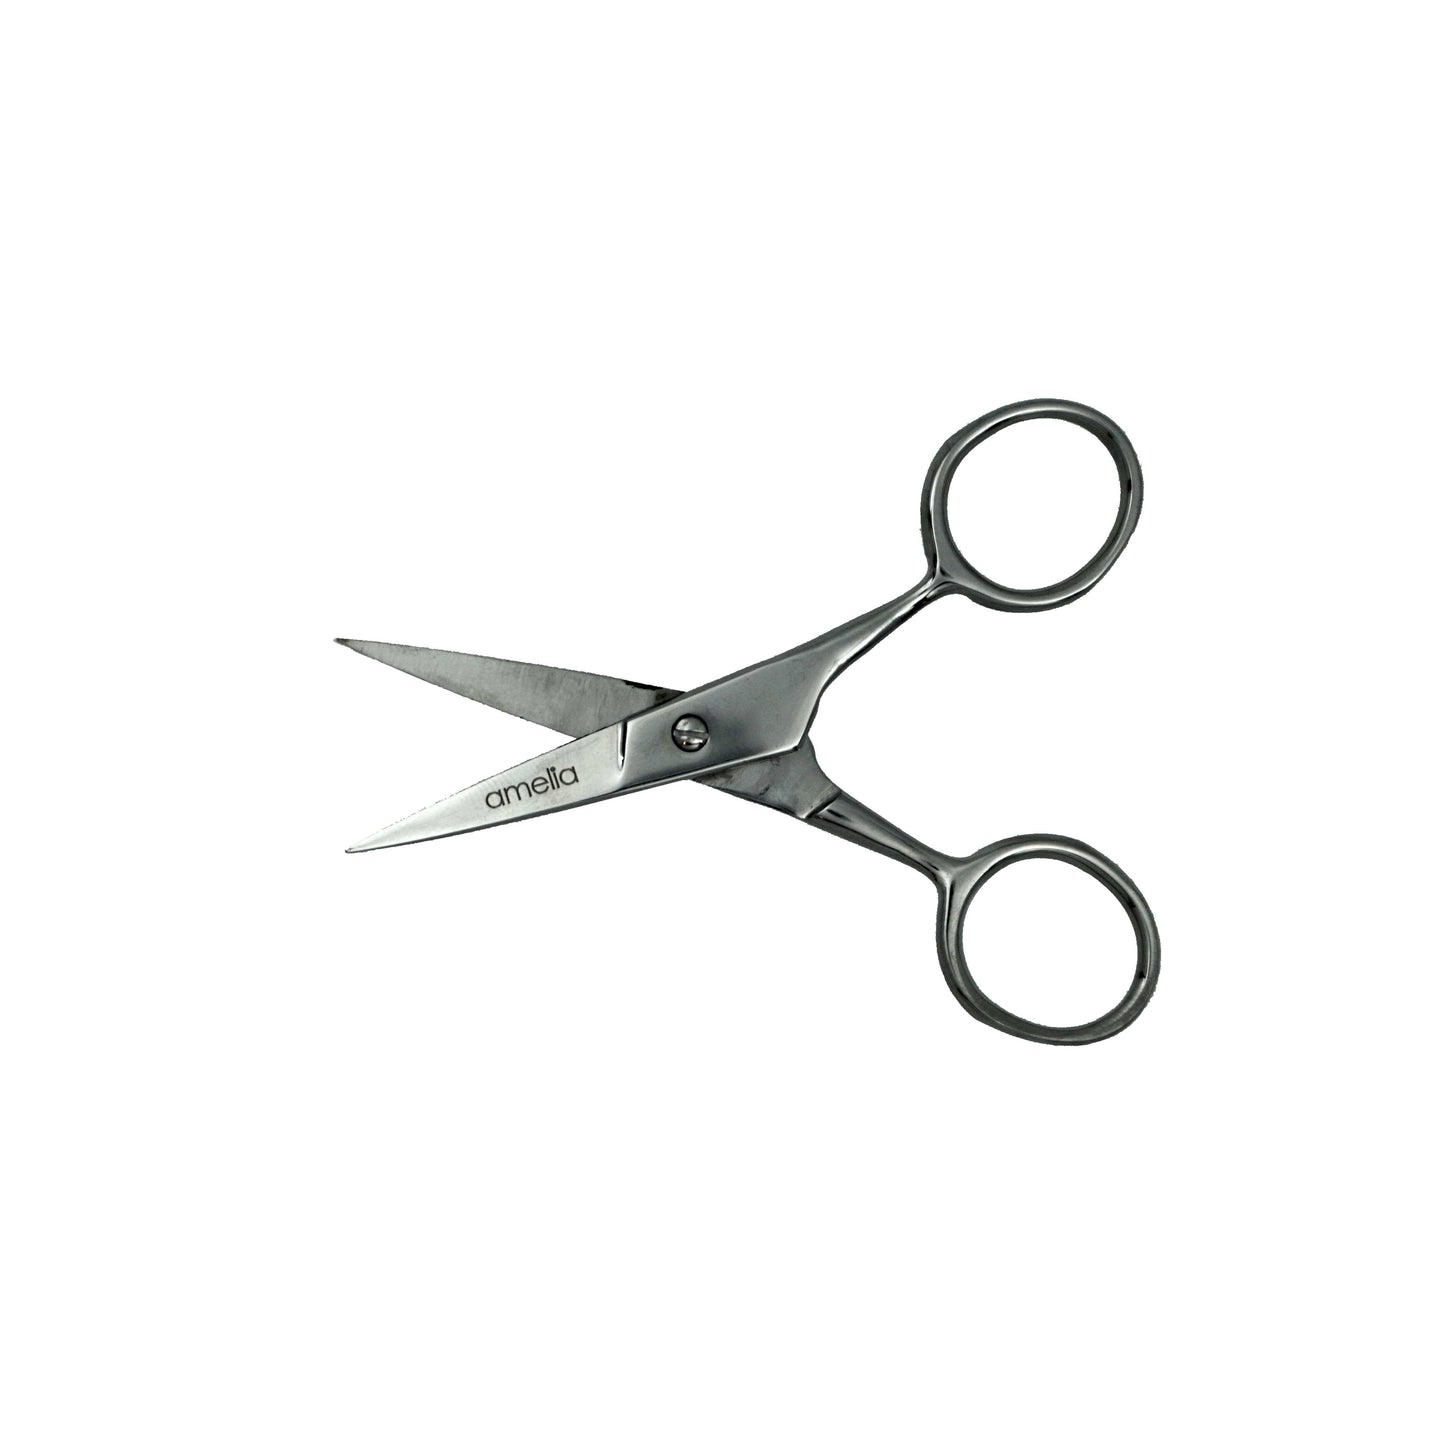 4" Right Handed, Stainless Steel Personal Trimming Shear